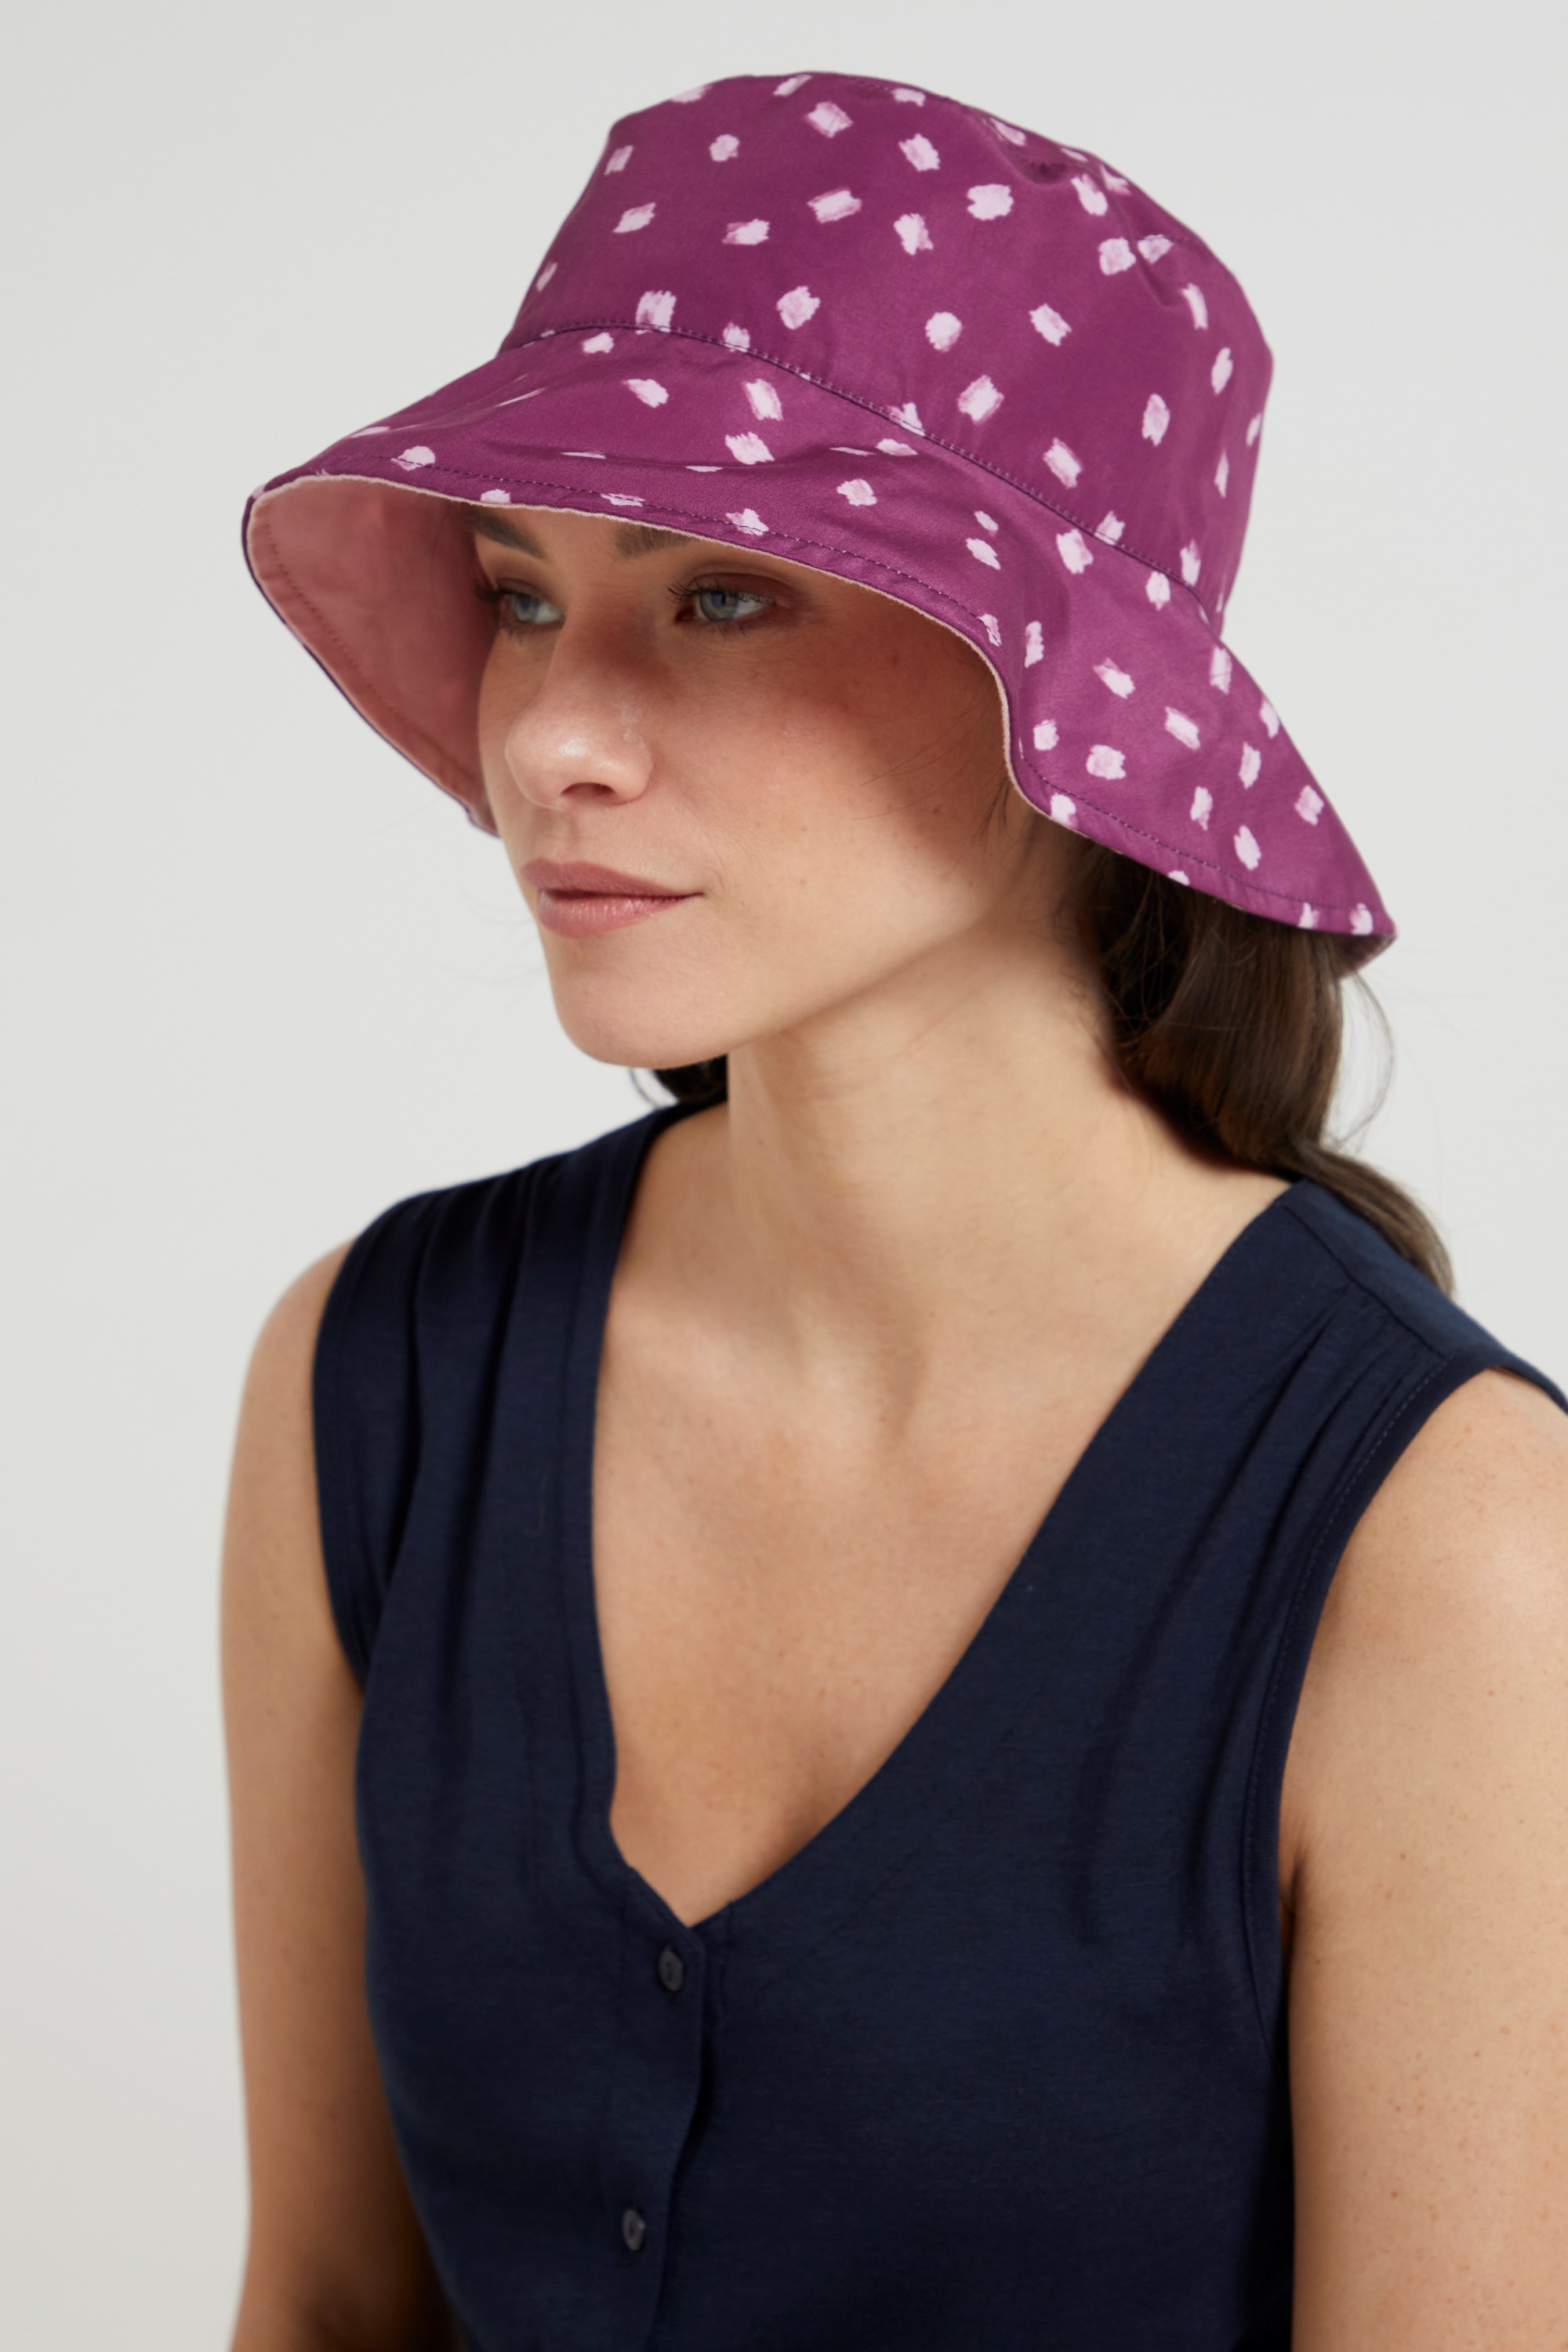 Mountain Warehouse Reversible Womens Printed Bucket Hat - Burgundy | Size One